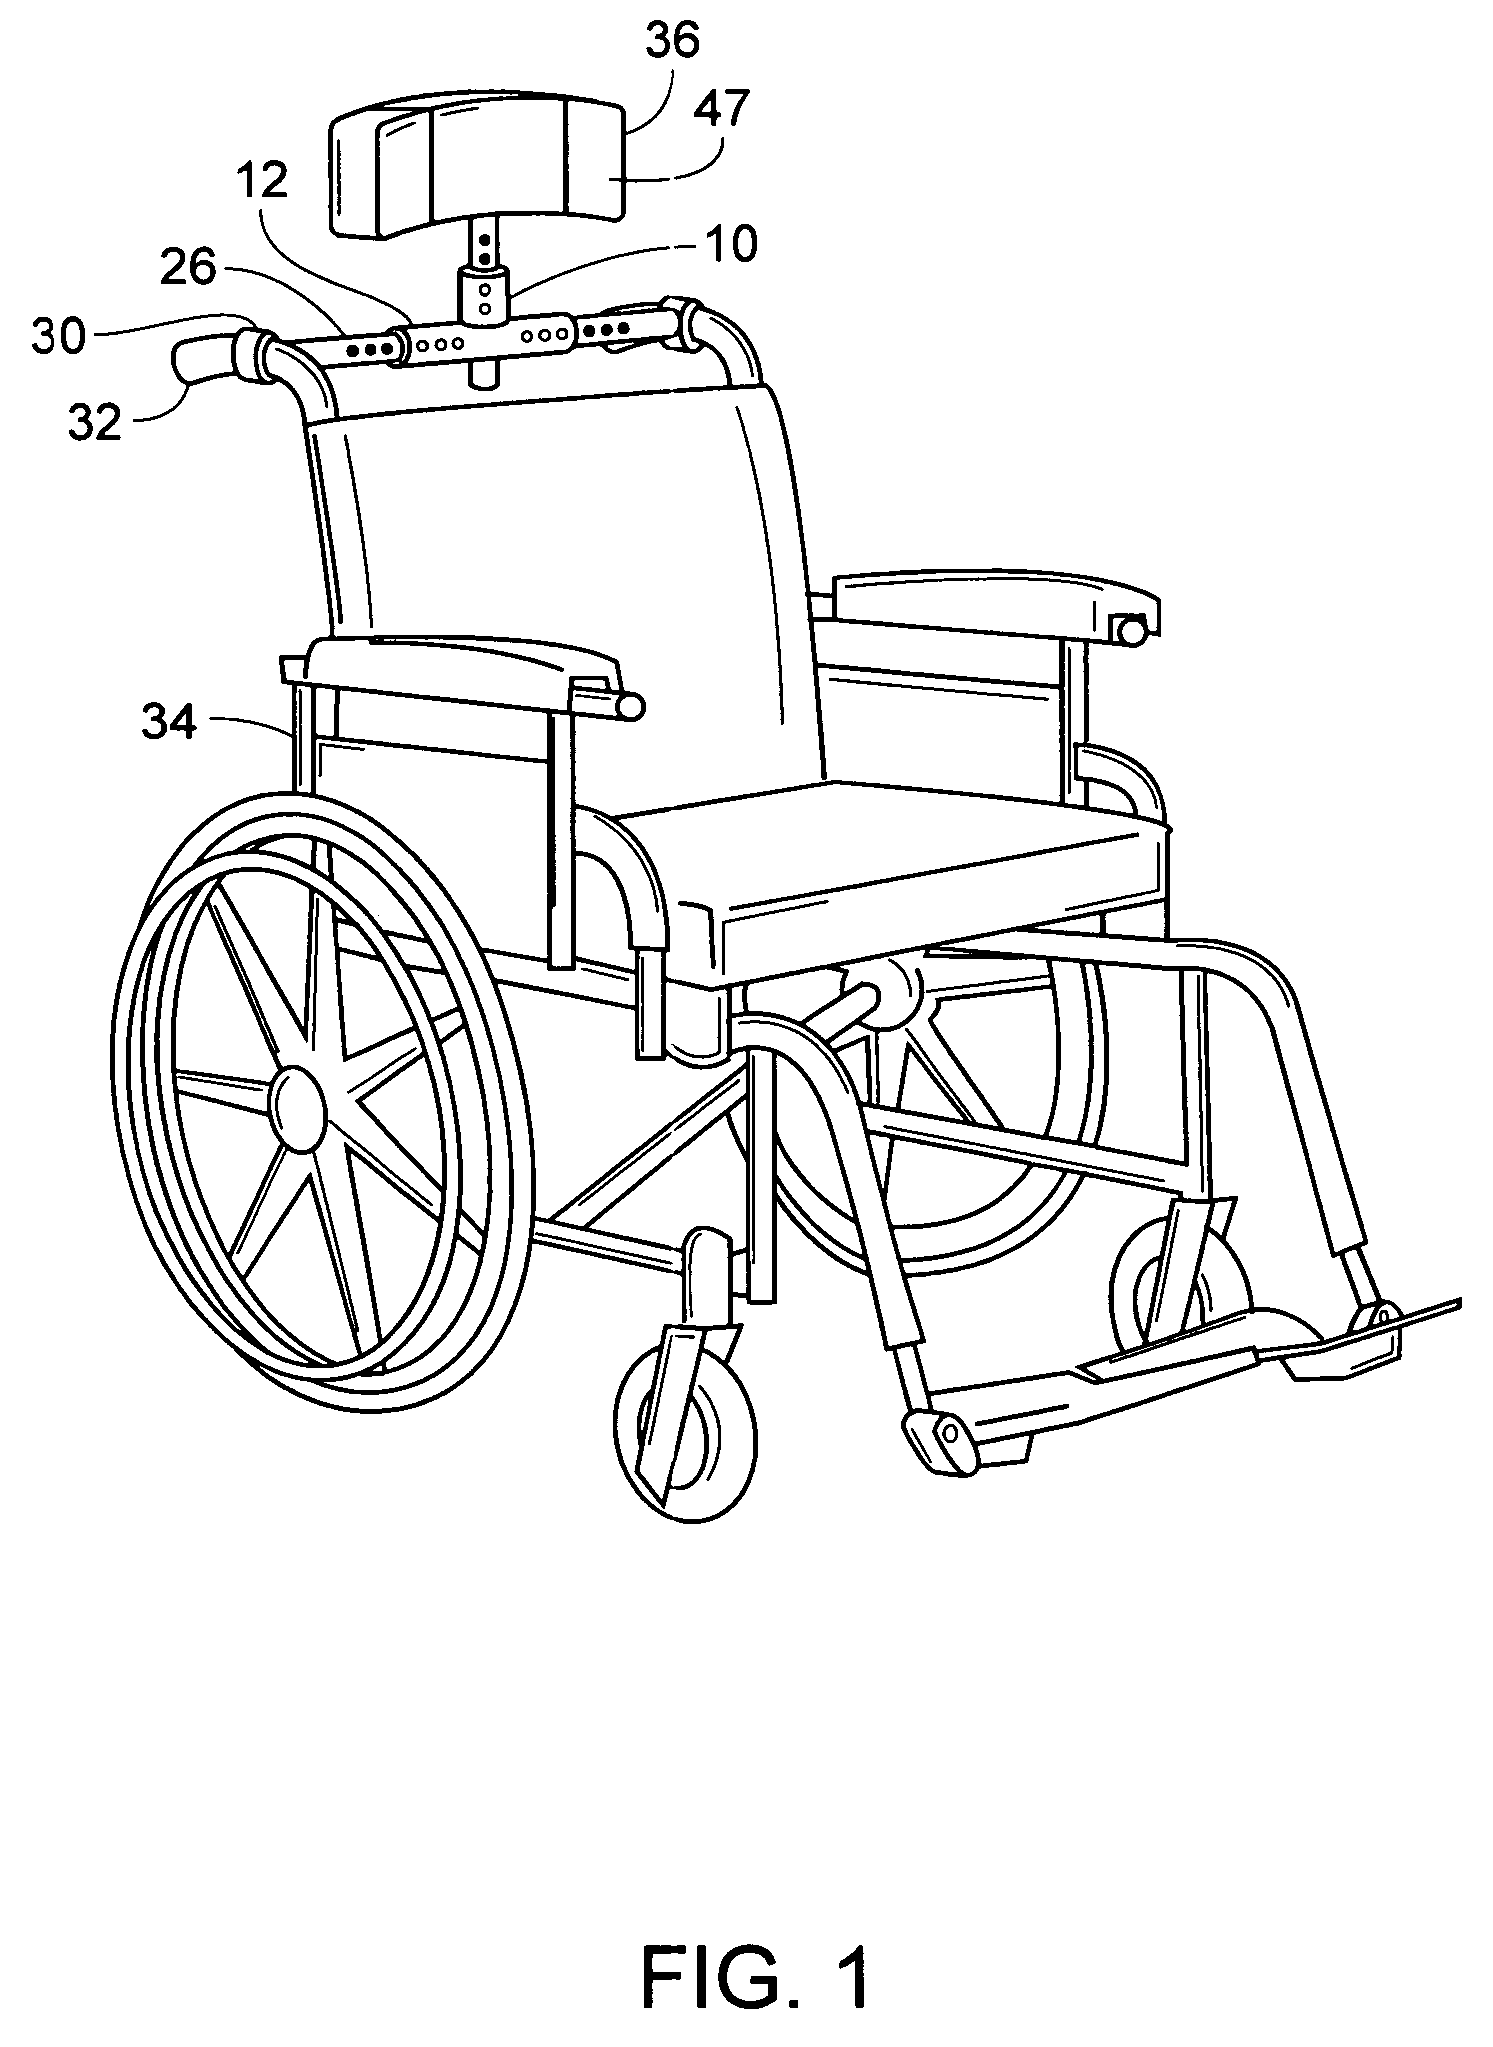 Removable adjustable headrest for wheelchairs having a neck roll